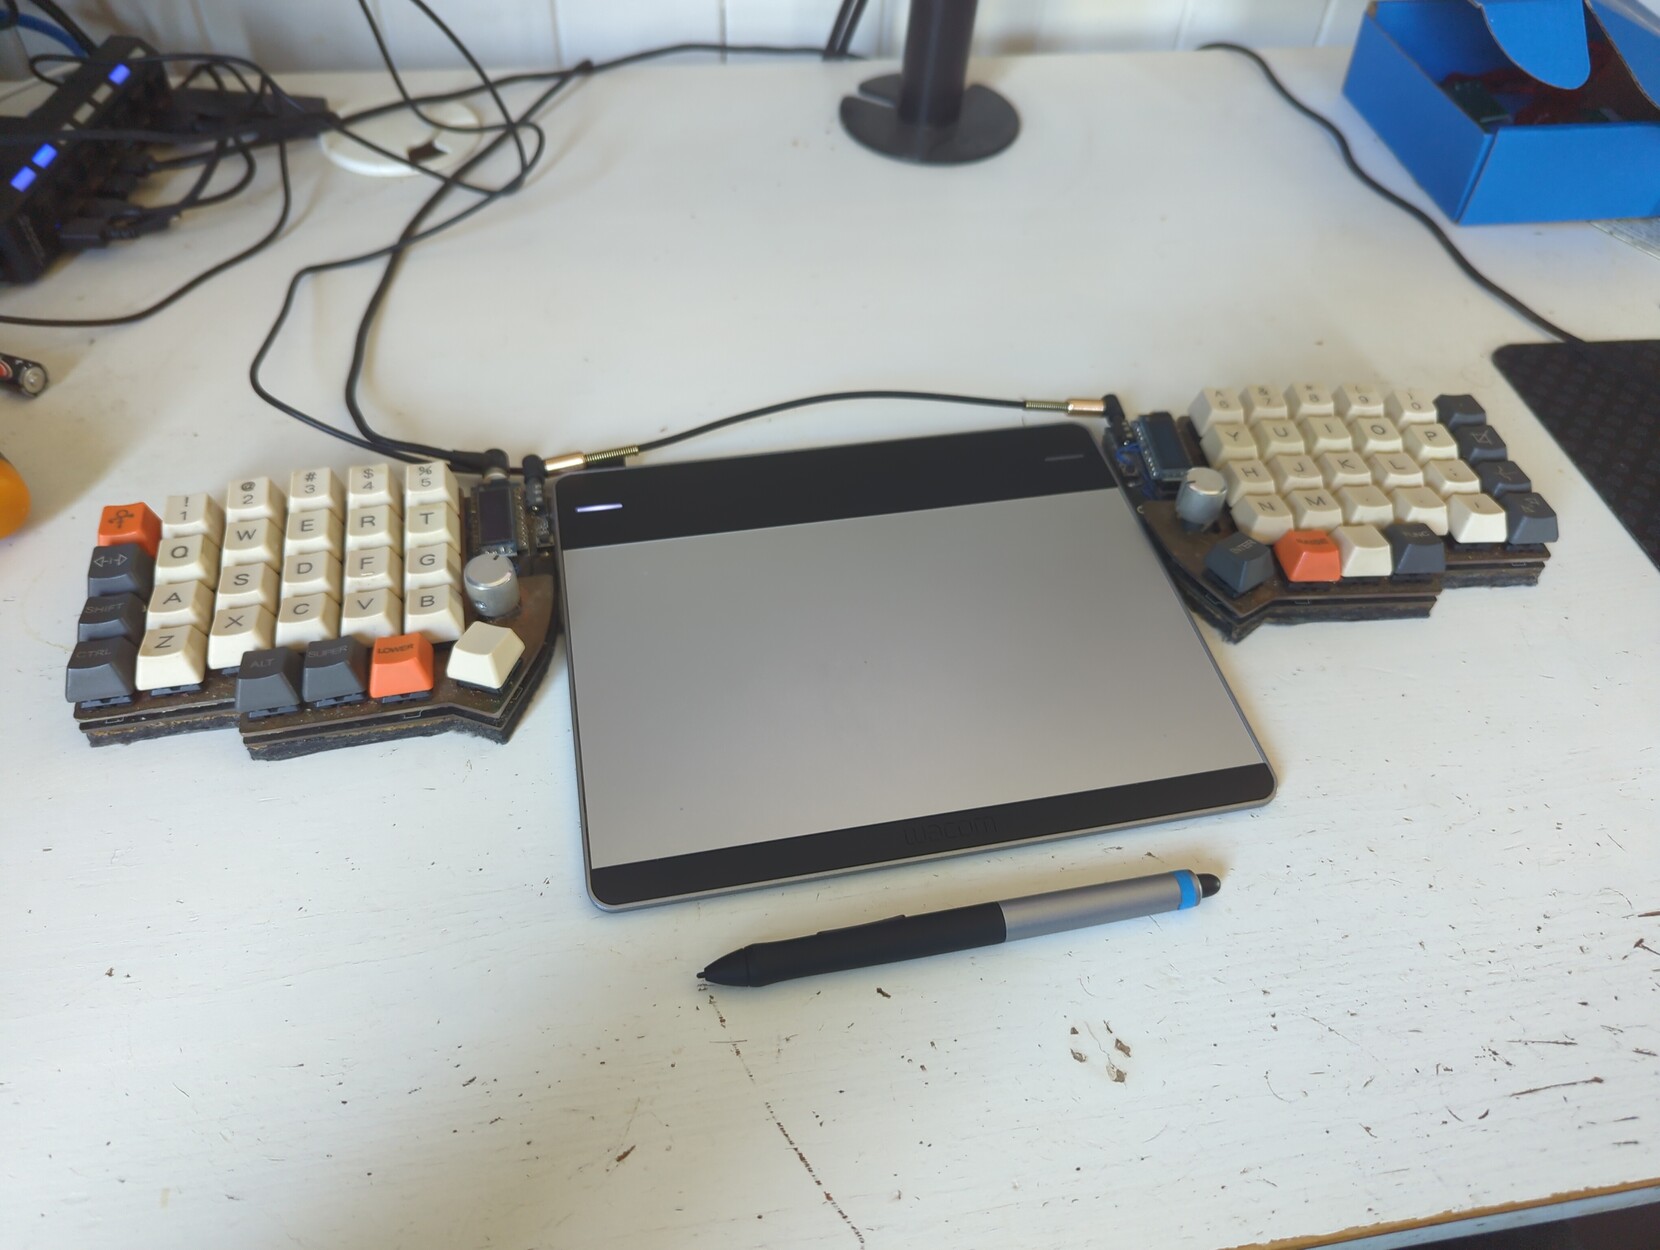 Homemade split keyboard and drawing tablet on a desk